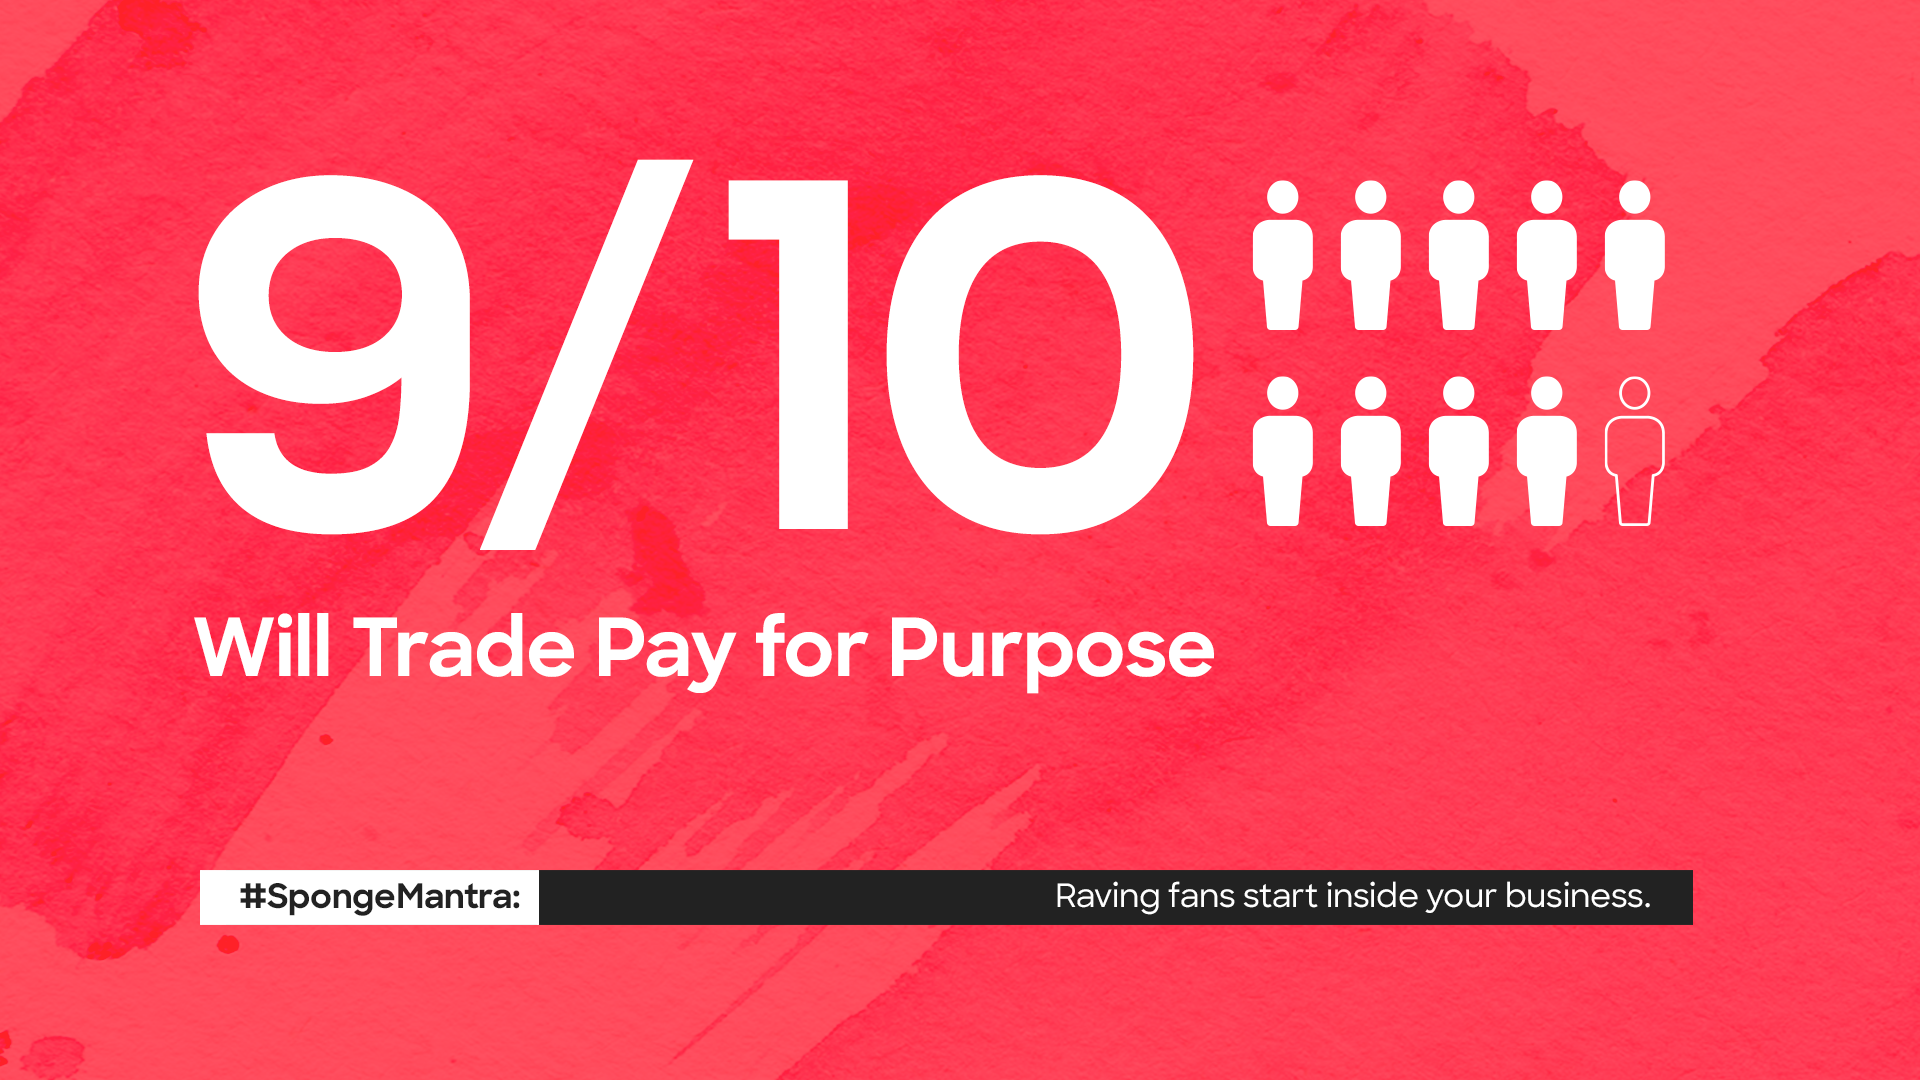 9/10 Will Trade Pay for Purpose